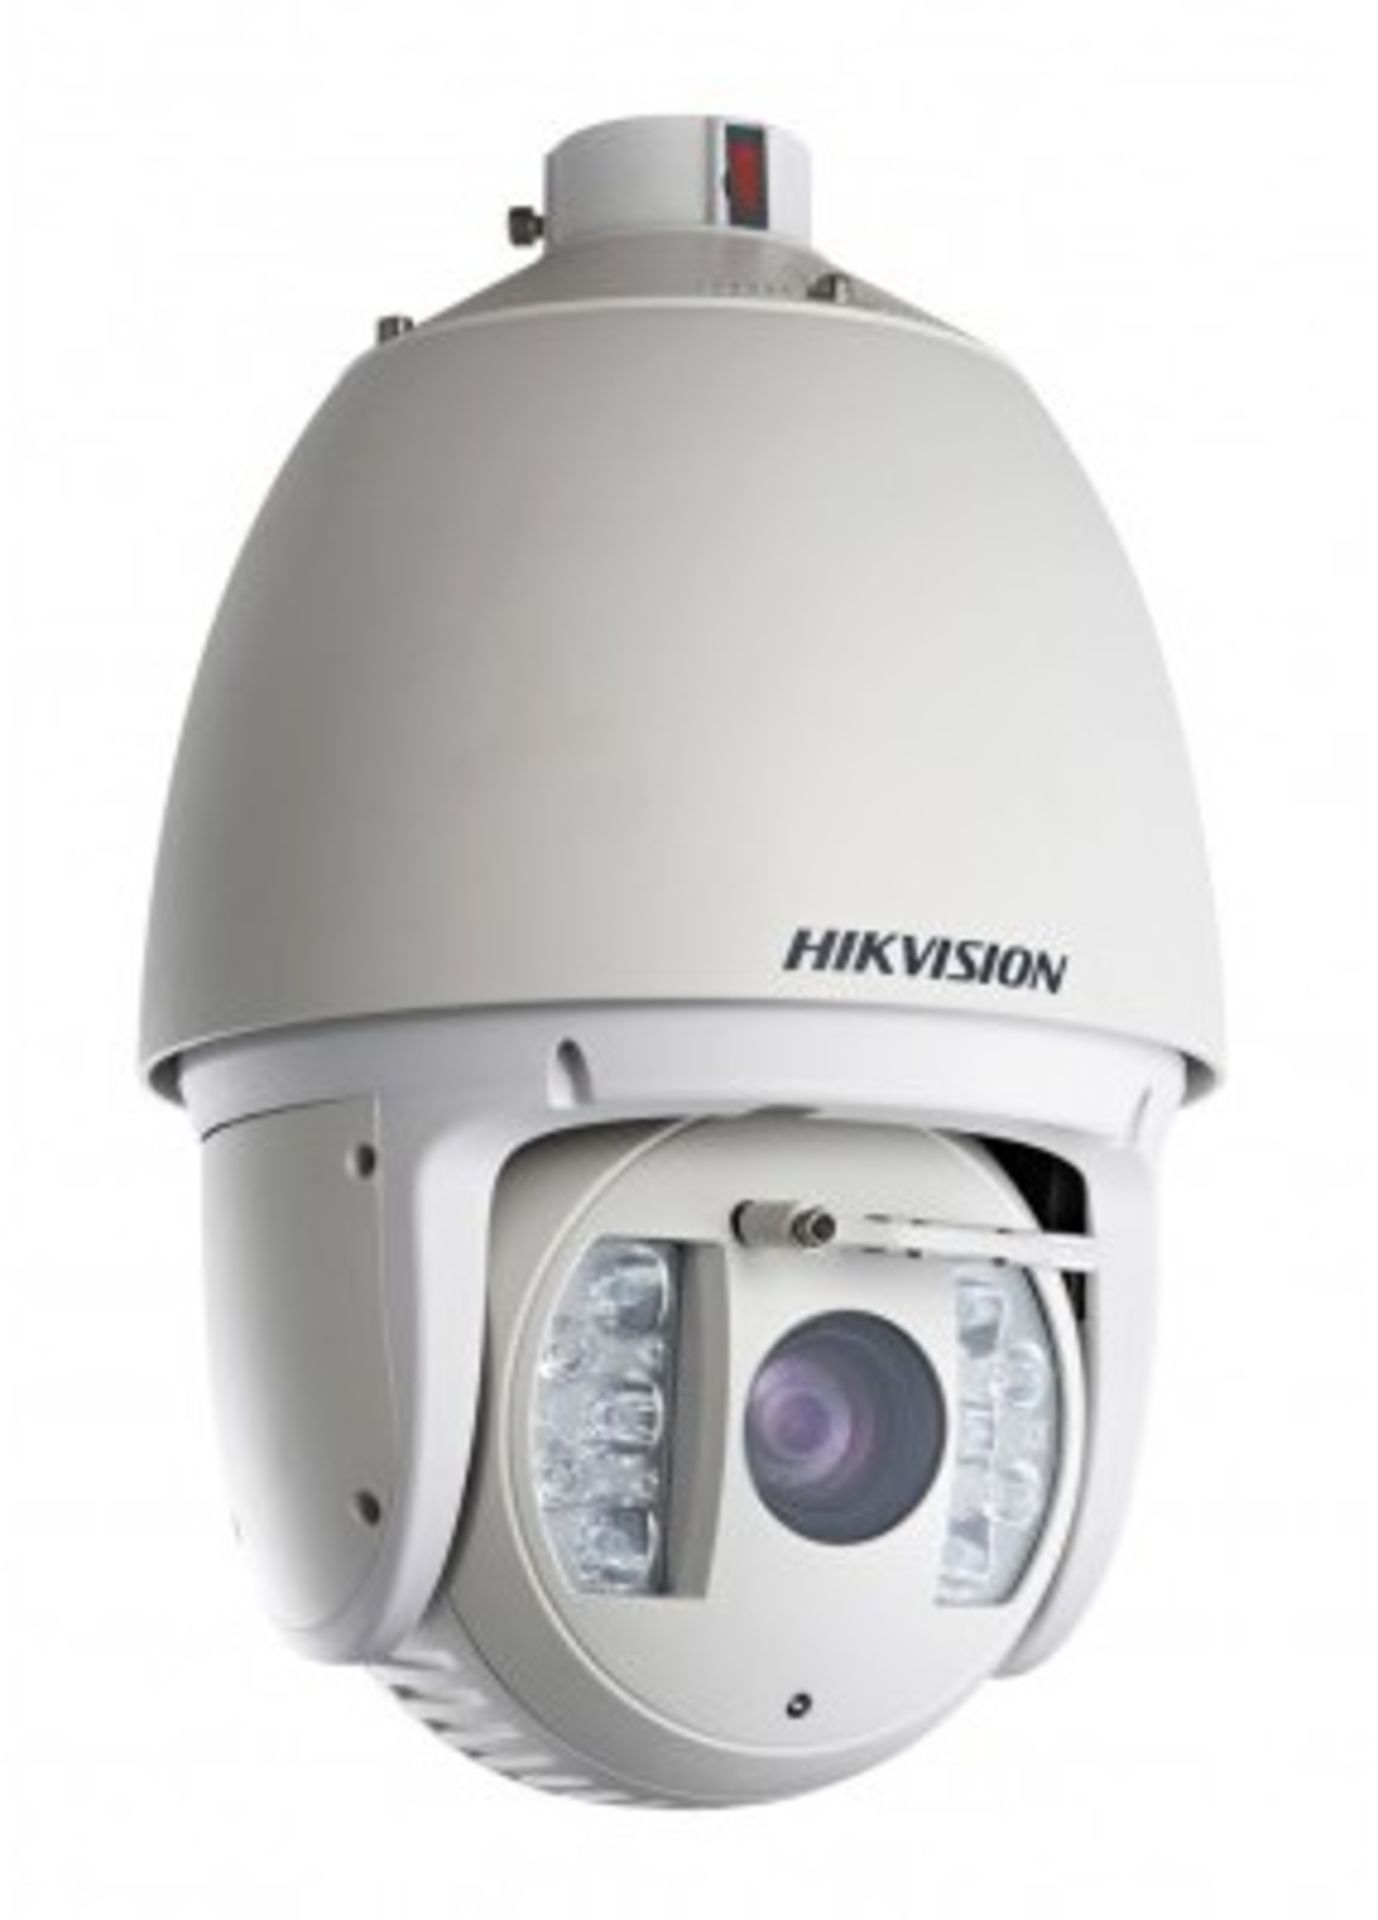 1 x Hikvision Digital Technology DS-2DF7284-A -Ê2MP IR Network PTZ Camera - RRP £2000 plus - New in